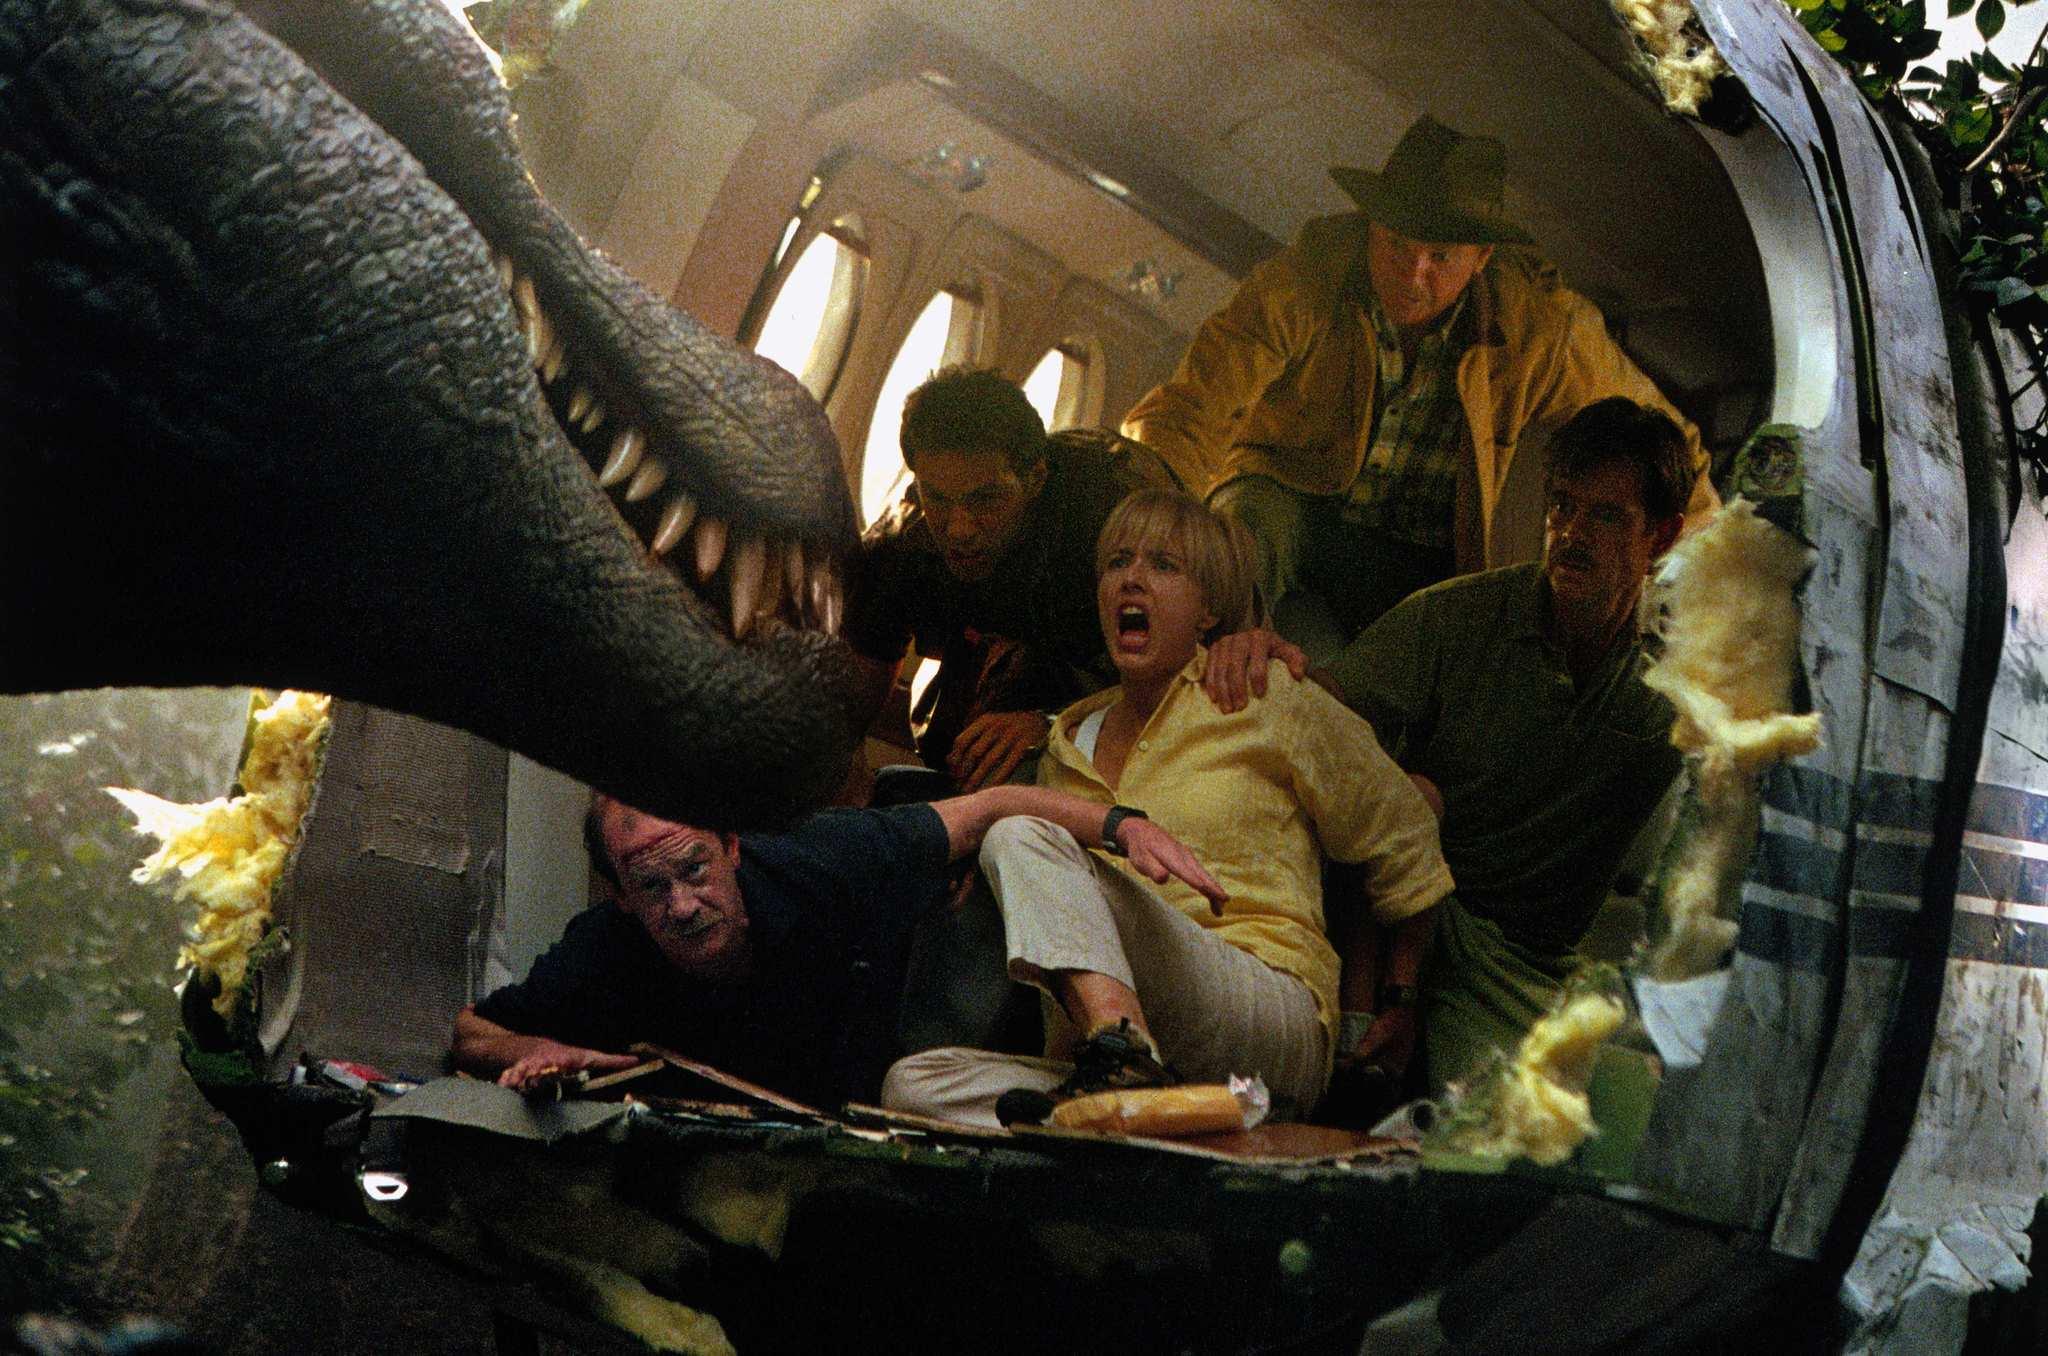 Jurassic Park III  Backgrounds, Compatible - PC, Mobile, Gadgets| 2048x1356 px